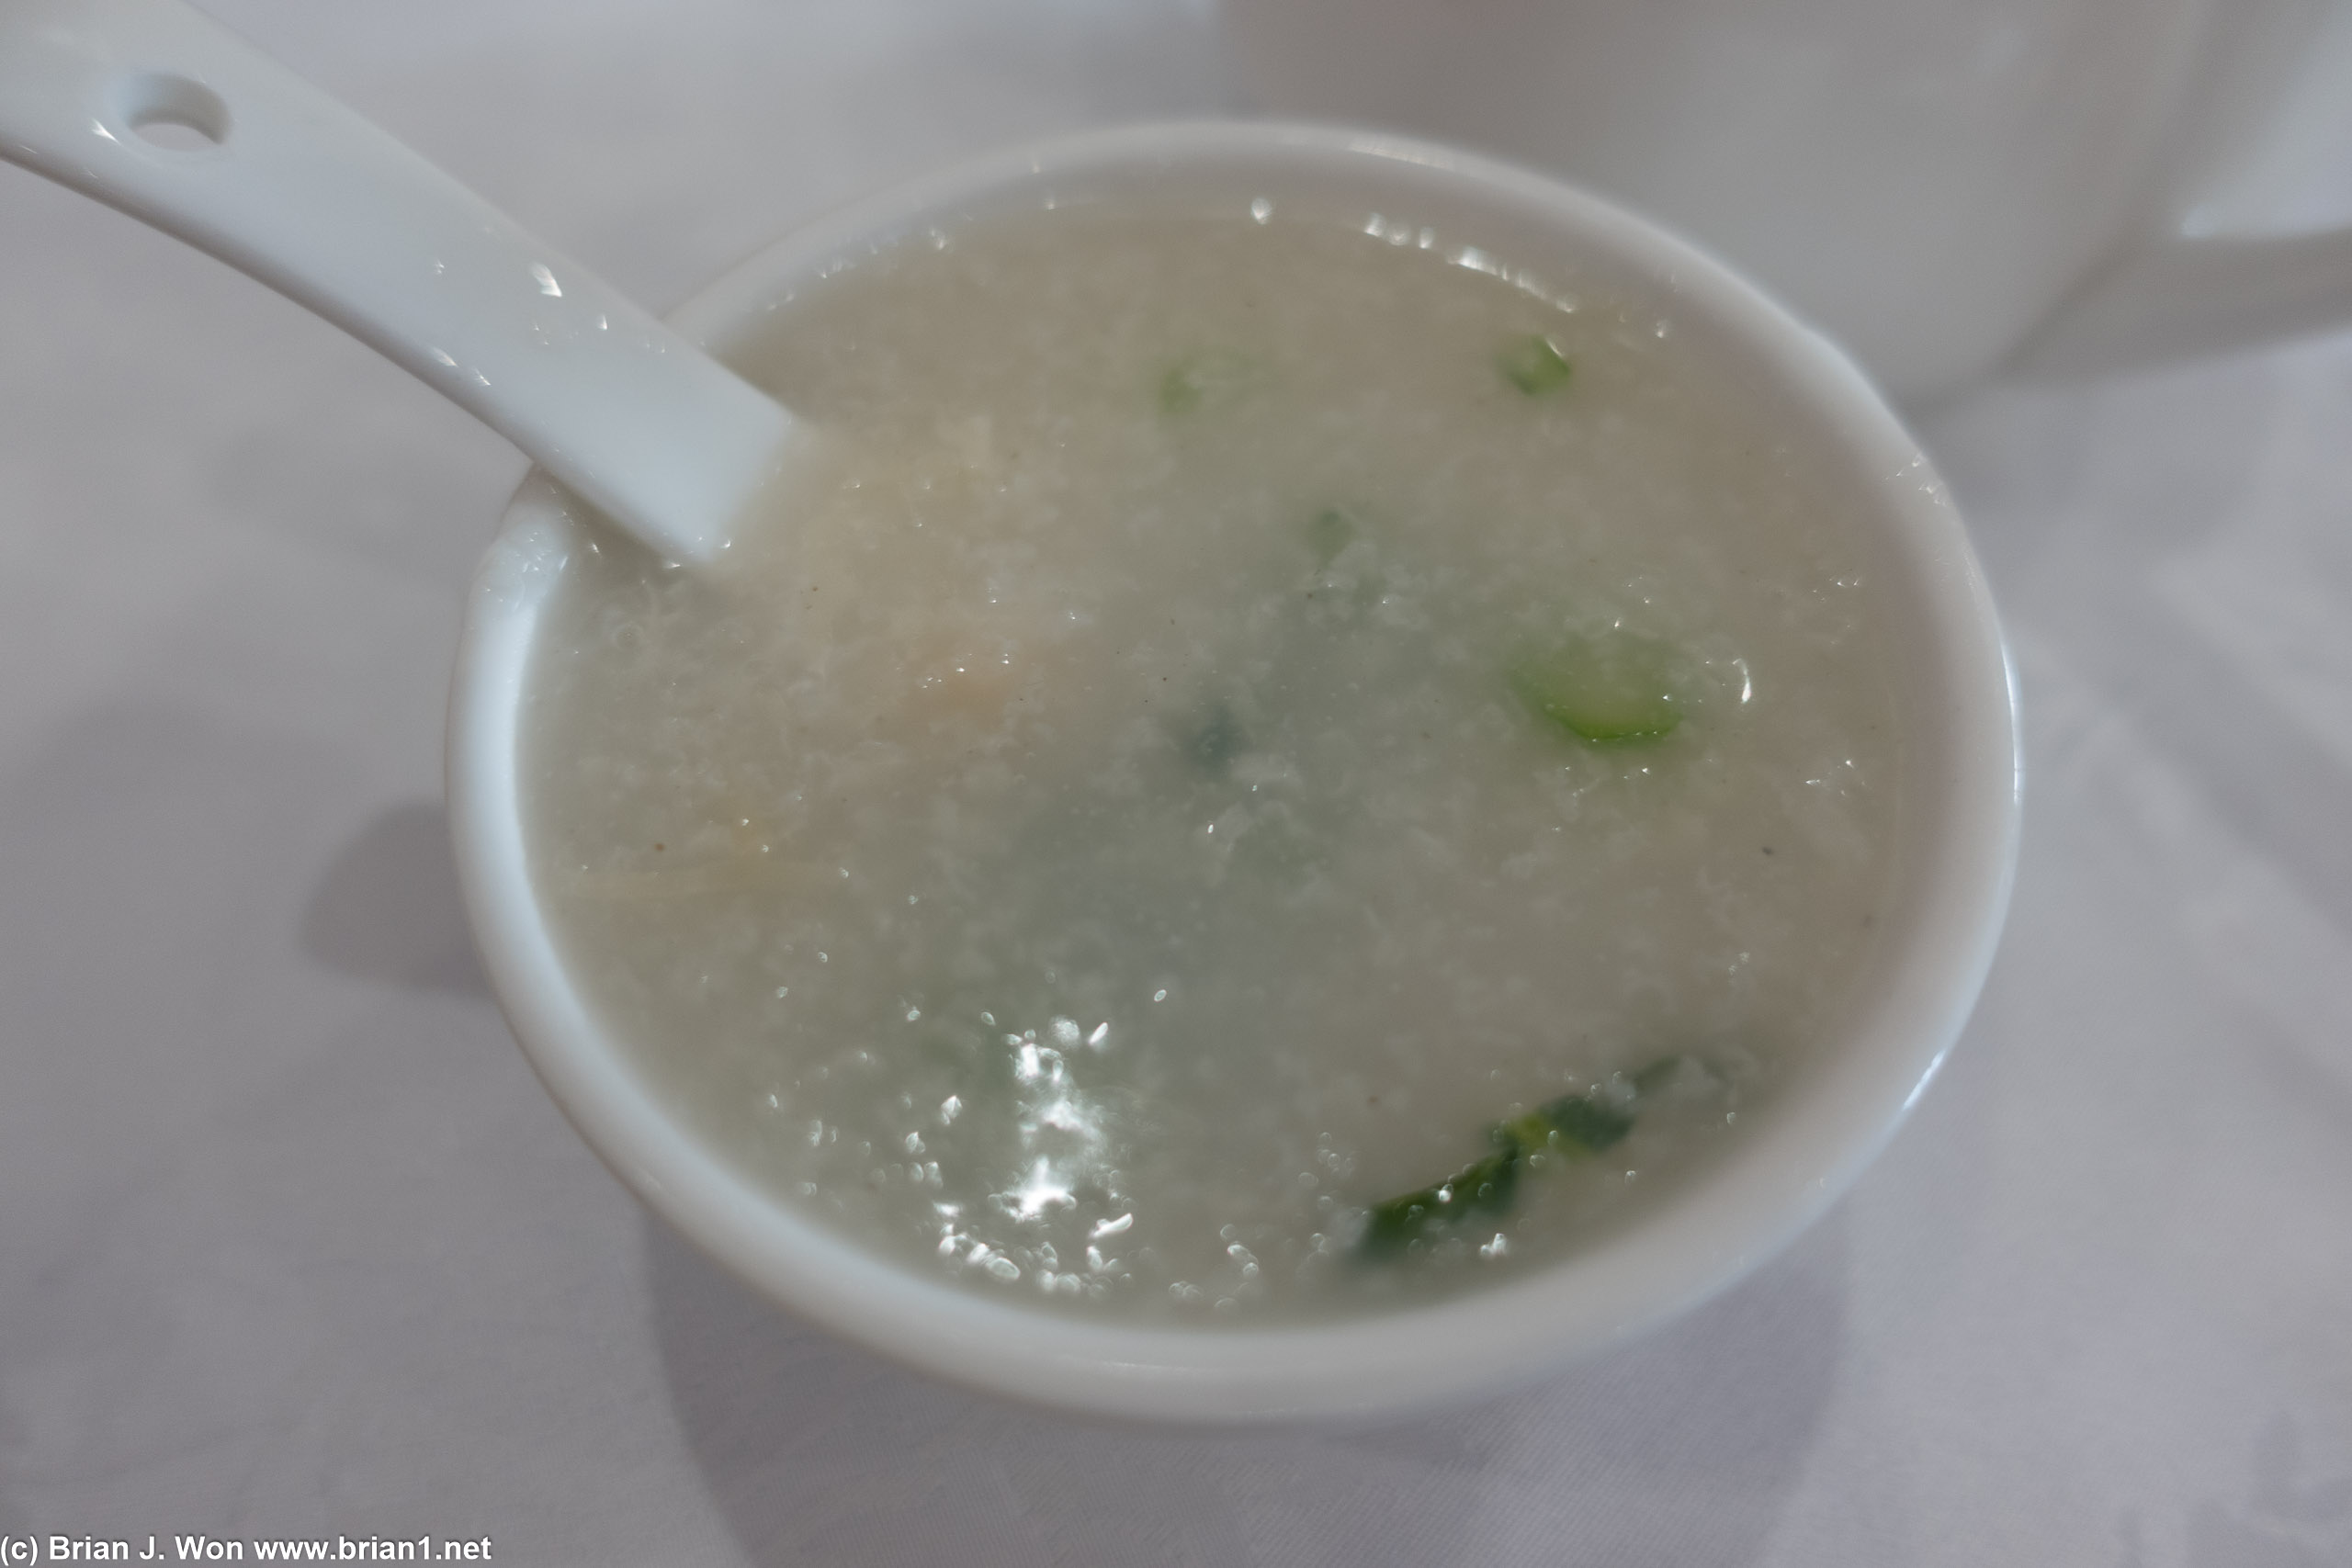 Scallop jook tasted off til you added white pepper-- with white pepper it was acceptable.